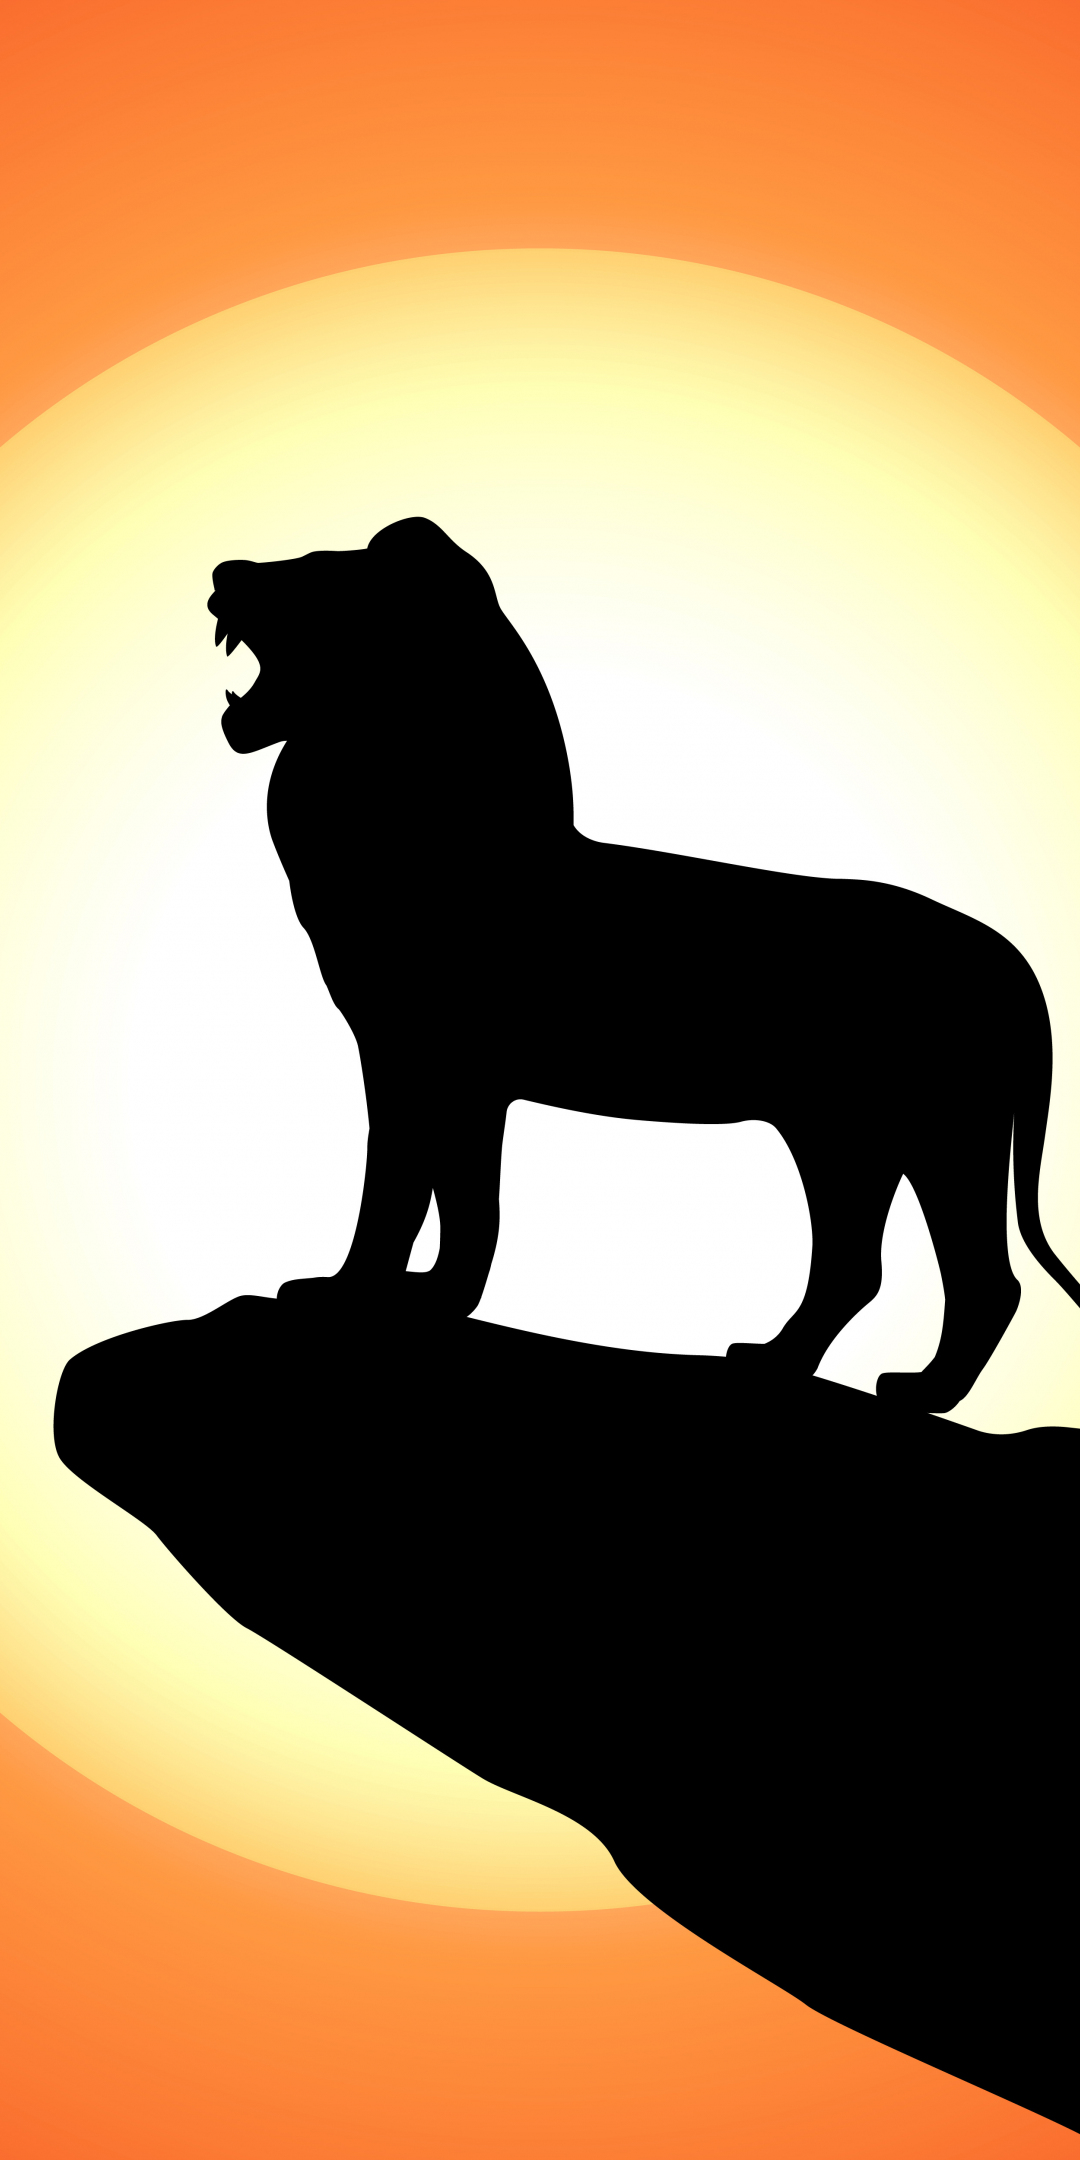 The Lion King, animation movie, silhouette, 1080x2160 wallpaper